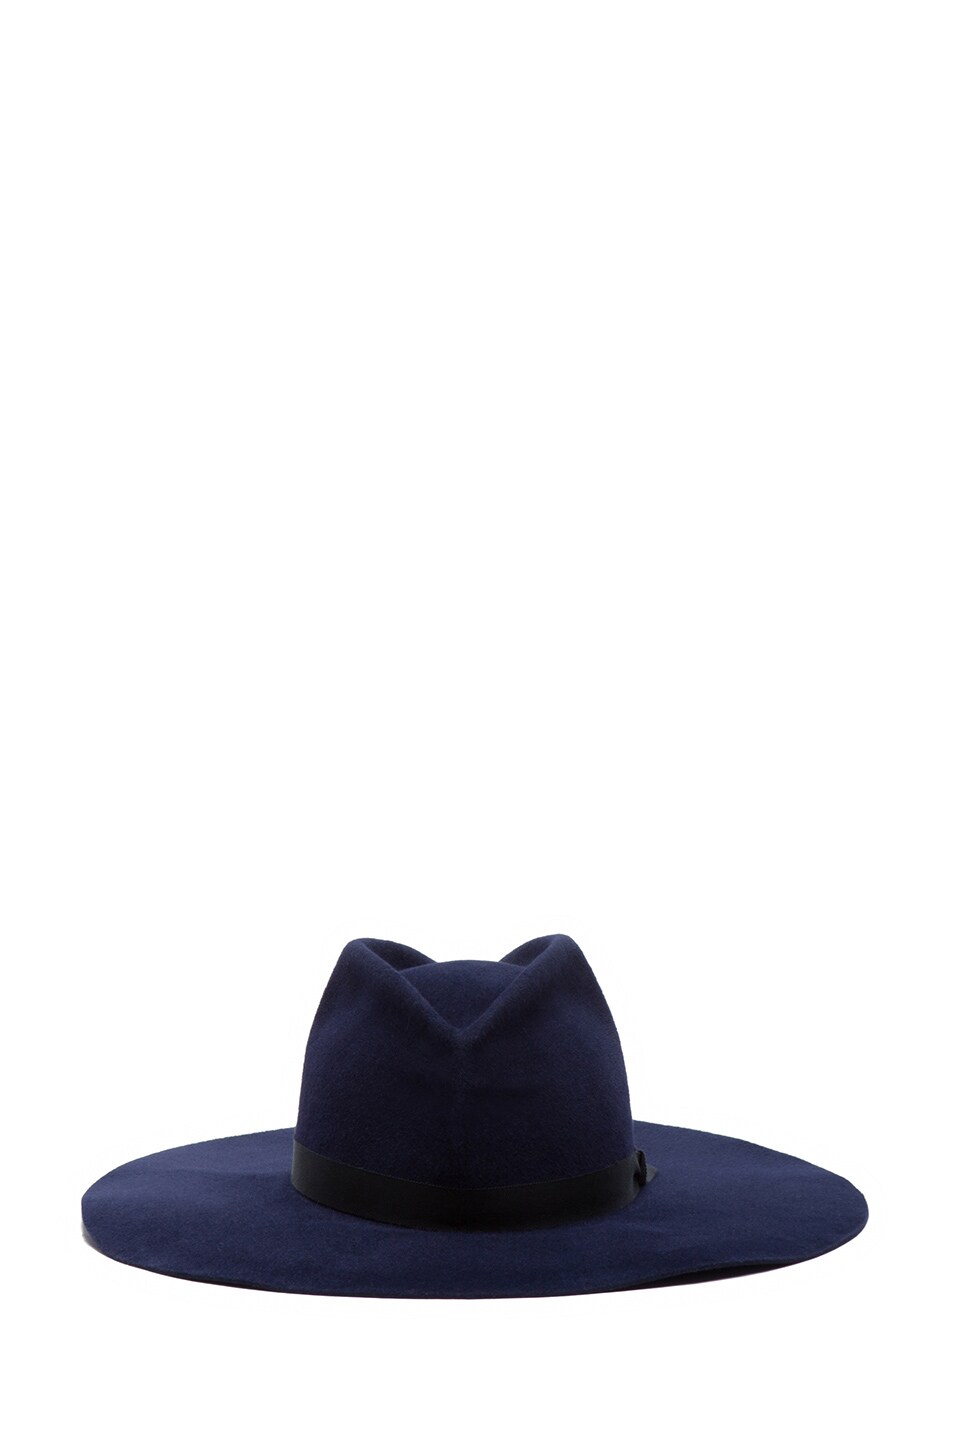 Image 1 of Gladys Tamez Millinery Saint Pierre Hat in Navy Blue